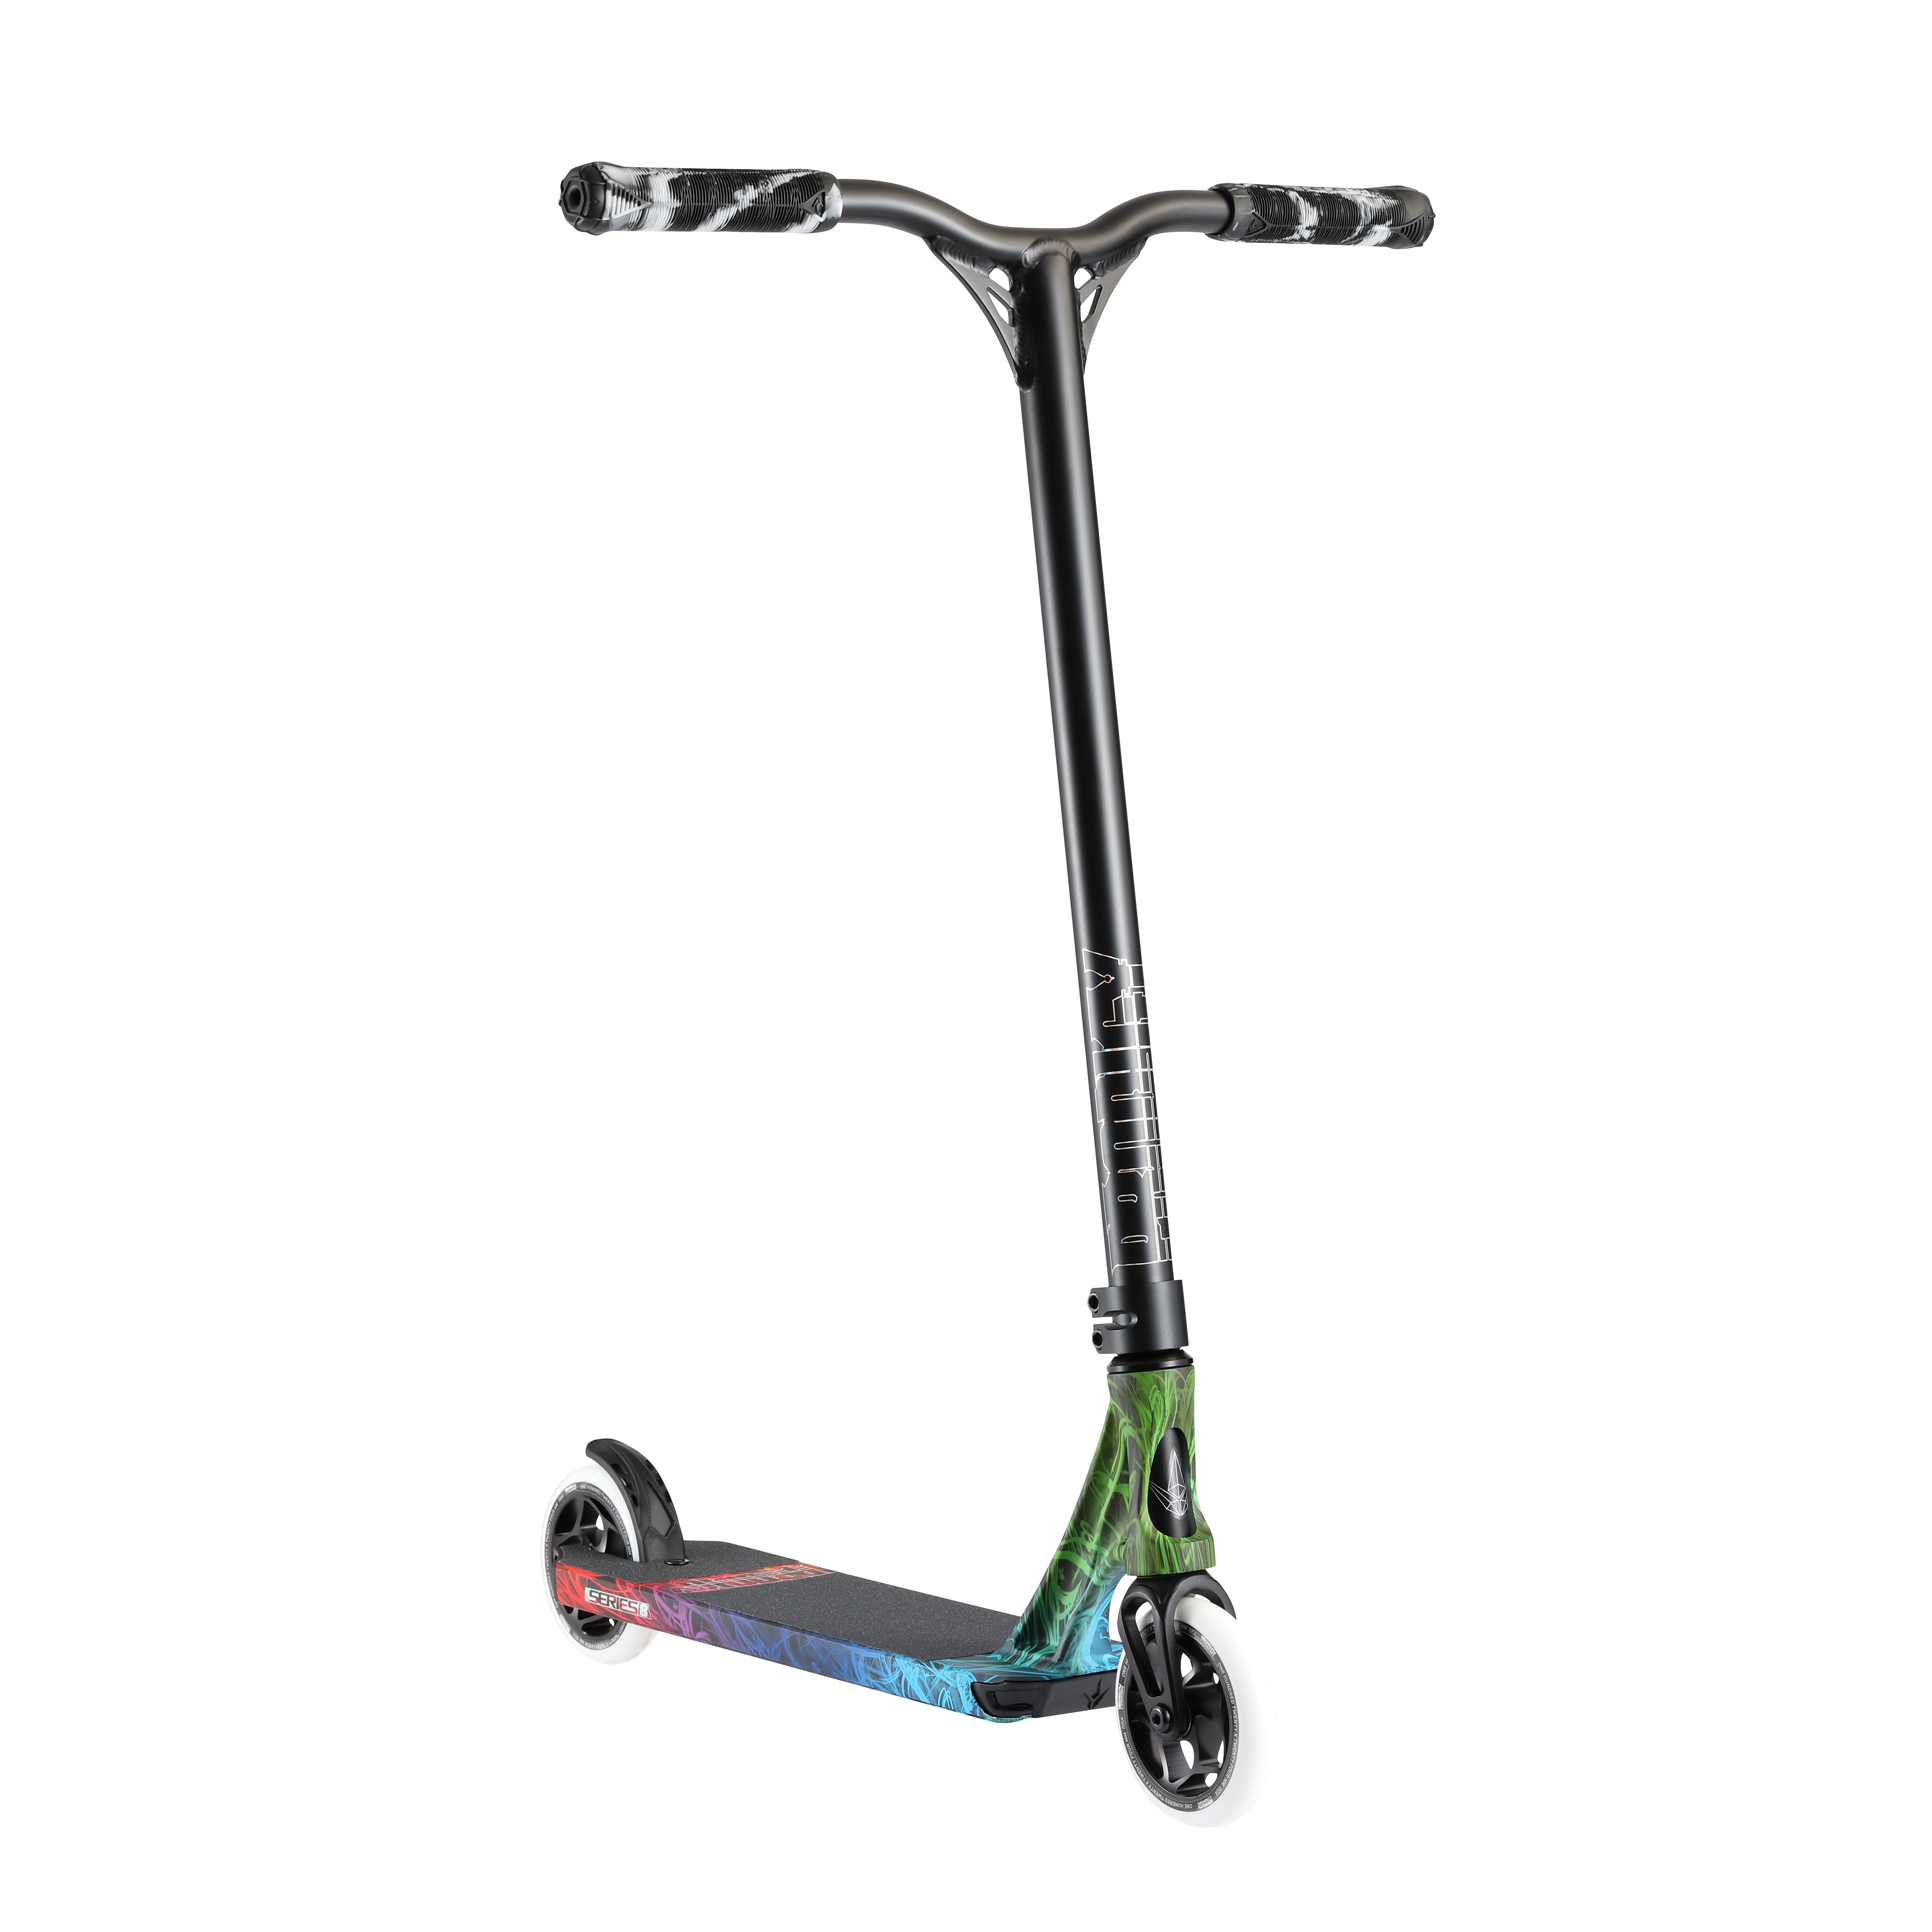 Envy Prodigy S8 - Scooter Complete Scratch 